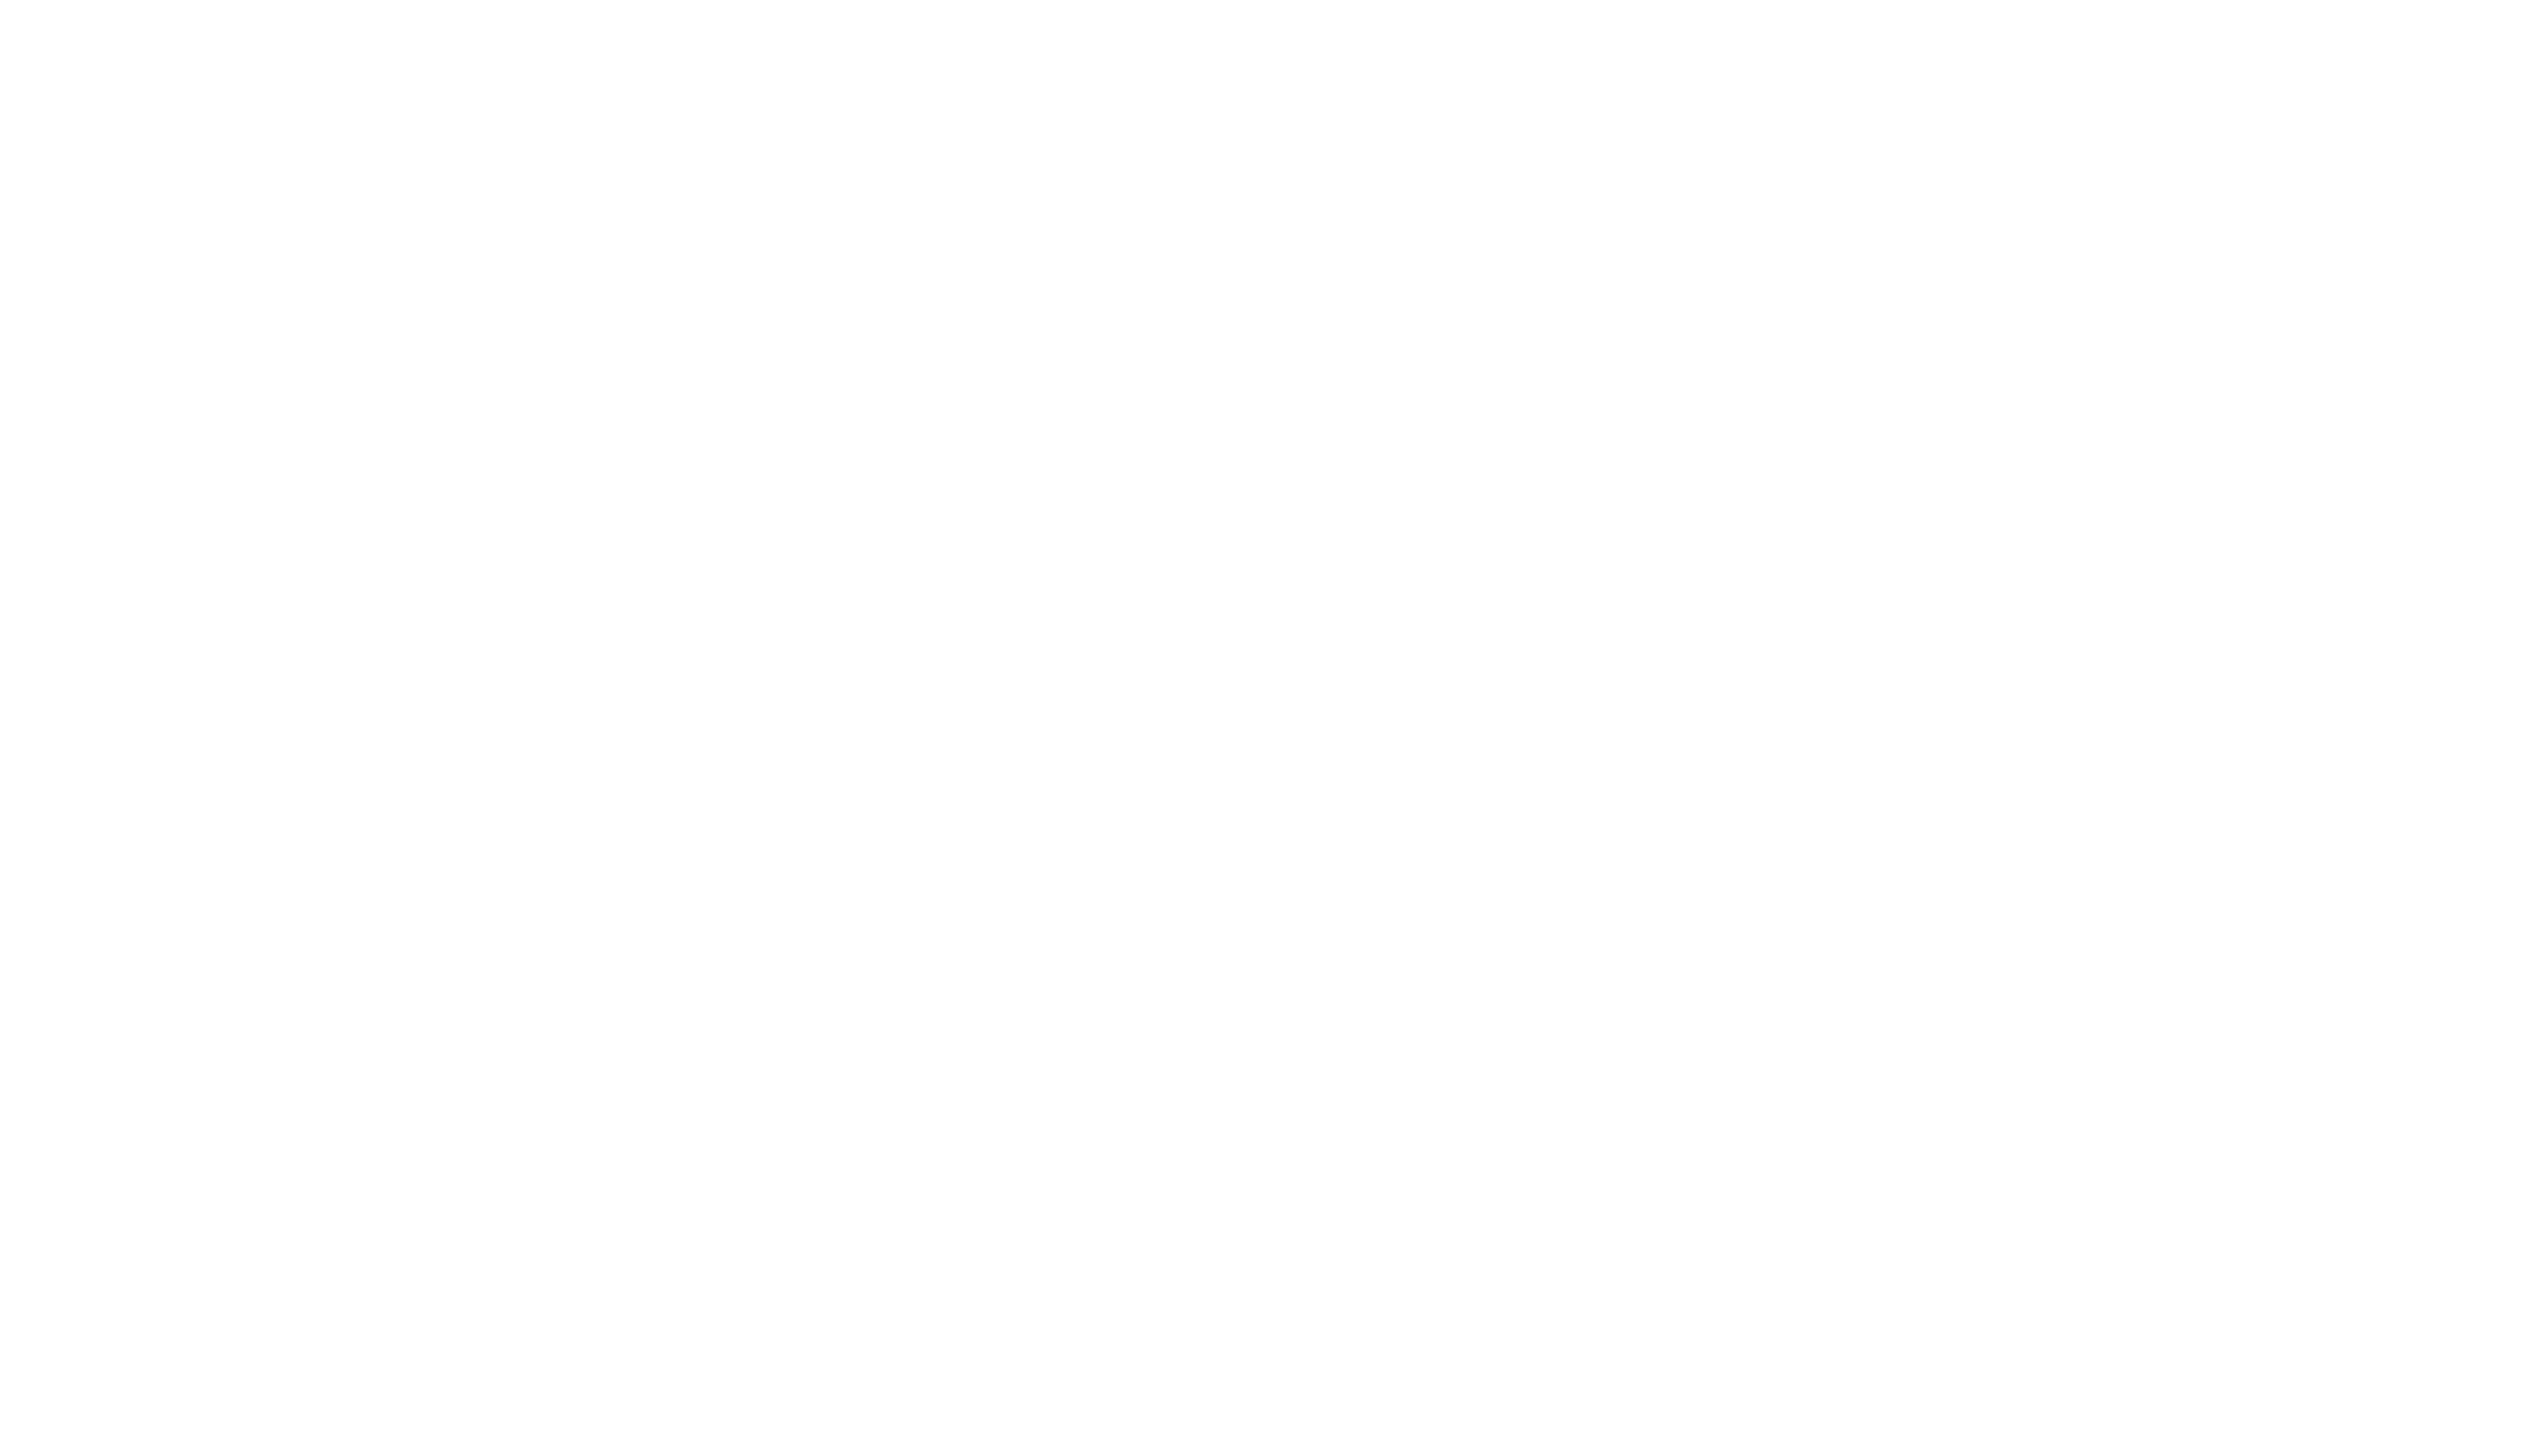 The image shows a white shopping bag icon against a black background. The shopping bag has a simplified silhouette of Mickey Mouse's head and ears in the center, creating a distinct Disney theme.